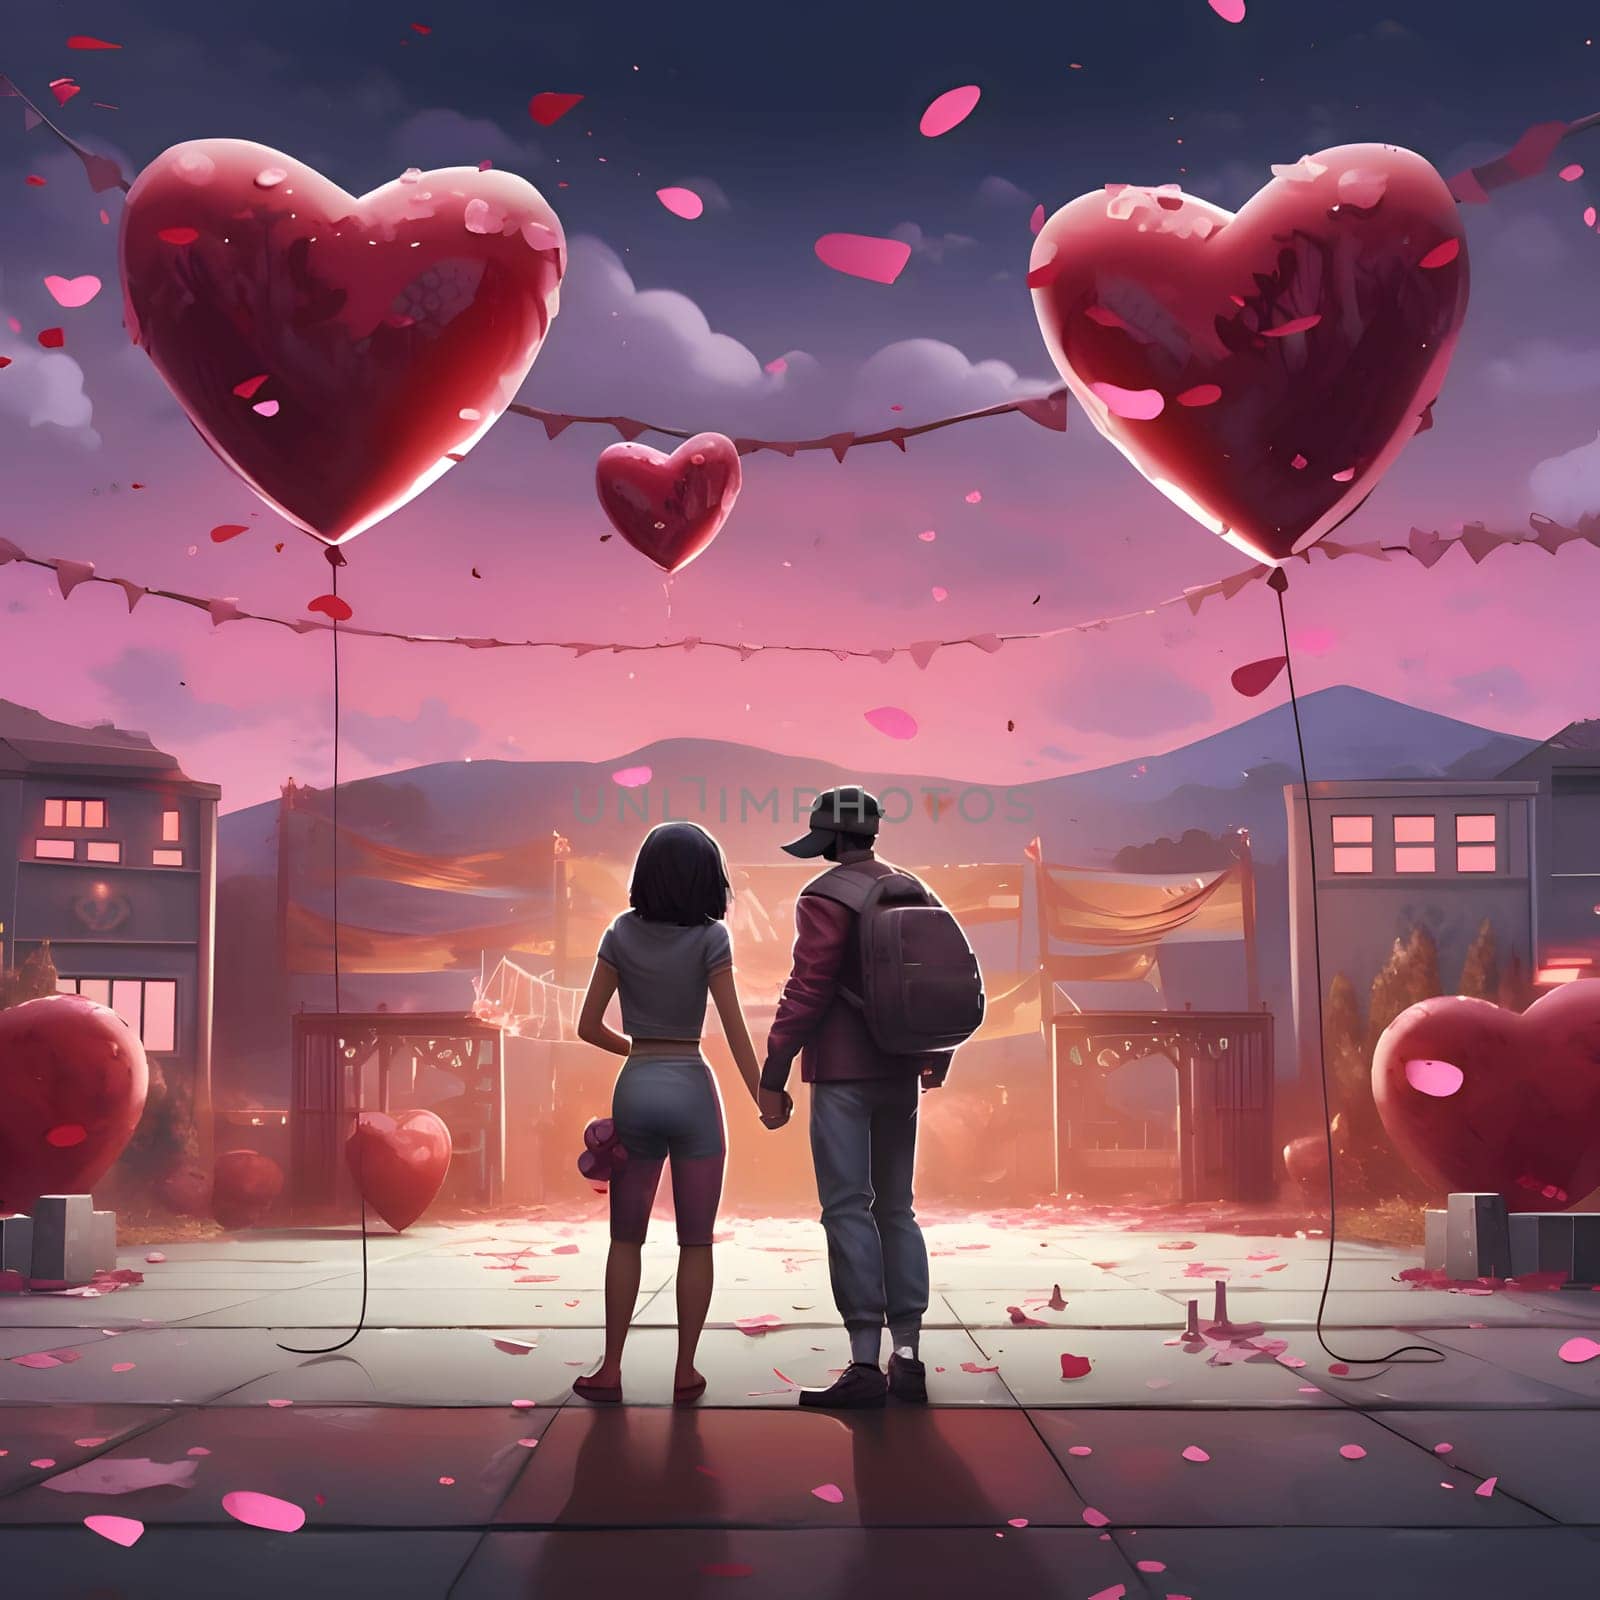 Illustration of a couple in love woman and man holding hands around heart-shaped balloons, confetti, Valentine's Day party. Heart as a symbol of affection and love. The time of falling in love and love.